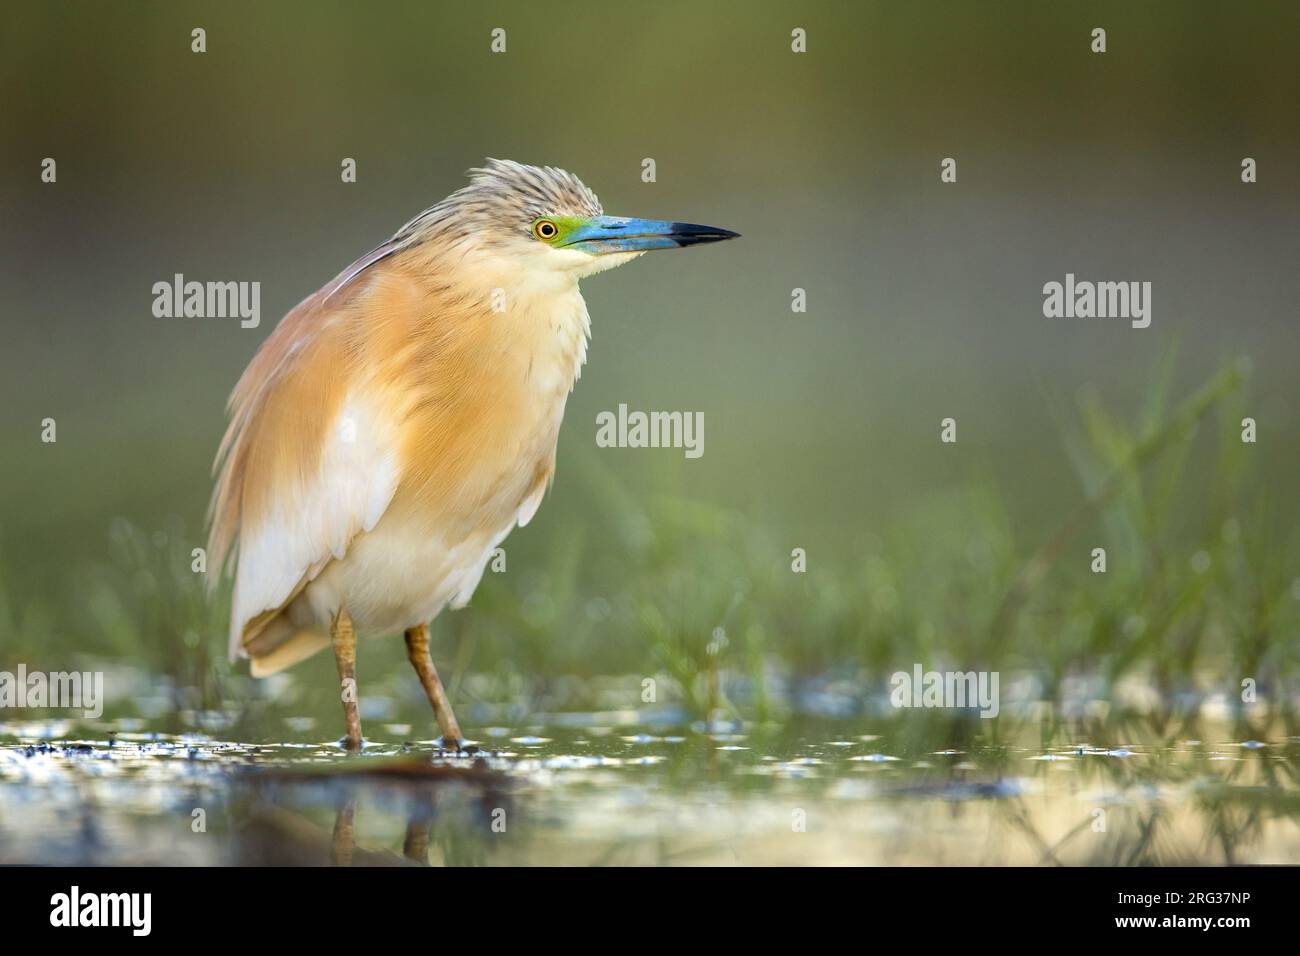 Summer plumaged adult Squacco Heron, Ardeola ralloides, in Italy. Stock Photo